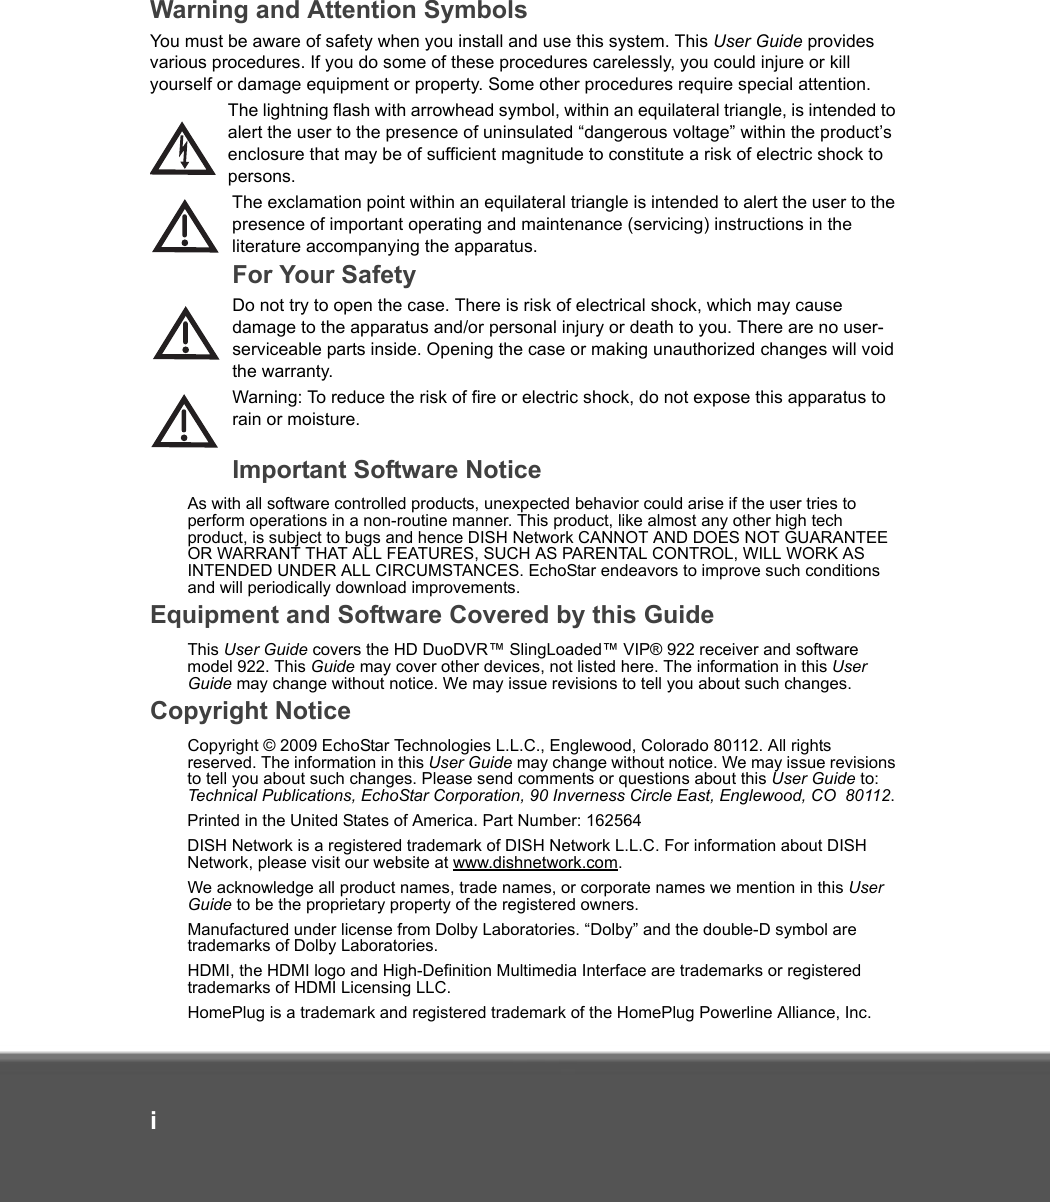 iWarning and Attention SymbolsYou must be aware of safety when you install and use this system. This User Guide provides various procedures. If you do some of these procedures carelessly, you could injure or kill yourself or damage equipment or property. Some other procedures require special attention.The lightning flash with arrowhead symbol, within an equilateral triangle, is intended to alert the user to the presence of uninsulated “dangerous voltage” within the product’s enclosure that may be of sufficient magnitude to constitute a risk of electric shock to persons.The exclamation point within an equilateral triangle is intended to alert the user to the presence of important operating and maintenance (servicing) instructions in the literature accompanying the apparatus.For Your SafetyDo not try to open the case. There is risk of electrical shock, which may cause damage to the apparatus and/or personal injury or death to you. There are no user-serviceable parts inside. Opening the case or making unauthorized changes will void the warranty.Warning: To reduce the risk of fire or electric shock, do not expose this apparatus to rain or moisture.Important Software NoticeAs with all software controlled products, unexpected behavior could arise if the user tries to perform operations in a non-routine manner. This product, like almost any other high tech product, is subject to bugs and hence DISH Network CANNOT AND DOES NOT GUARANTEE OR WARRANT THAT ALL FEATURES, SUCH AS PARENTAL CONTROL, WILL WORK AS INTENDED UNDER ALL CIRCUMSTANCES. EchoStar endeavors to improve such conditions and will periodically download improvements. Equipment and Software Covered by this GuideThis User Guide covers the HD DuoDVR™ SlingLoaded™ VIP® 922 receiver and software model 922. This Guide may cover other devices, not listed here. The information in this User Guide may change without notice. We may issue revisions to tell you about such changes.Copyright NoticeCopyright © 2009 EchoStar Technologies L.L.C., Englewood, Colorado 80112. All rights reserved. The information in this User Guide may change without notice. We may issue revisions to tell you about such changes. Please send comments or questions about this User Guide to: Technical Publications, EchoStar Corporation, 90 Inverness Circle East, Englewood, CO  80112.Printed in the United States of America. Part Number: 162564DISH Network is a registered trademark of DISH Network L.L.C. For information about DISH Network, please visit our website at www.dishnetwork.com. We acknowledge all product names, trade names, or corporate names we mention in this User Guide to be the proprietary property of the registered owners.Manufactured under license from Dolby Laboratories. “Dolby” and the double-D symbol are trademarks of Dolby Laboratories.HDMI, the HDMI logo and High-Definition Multimedia Interface are trademarks or registered trademarks of HDMI Licensing LLC.HomePlug is a trademark and registered trademark of the HomePlug Powerline Alliance, Inc.